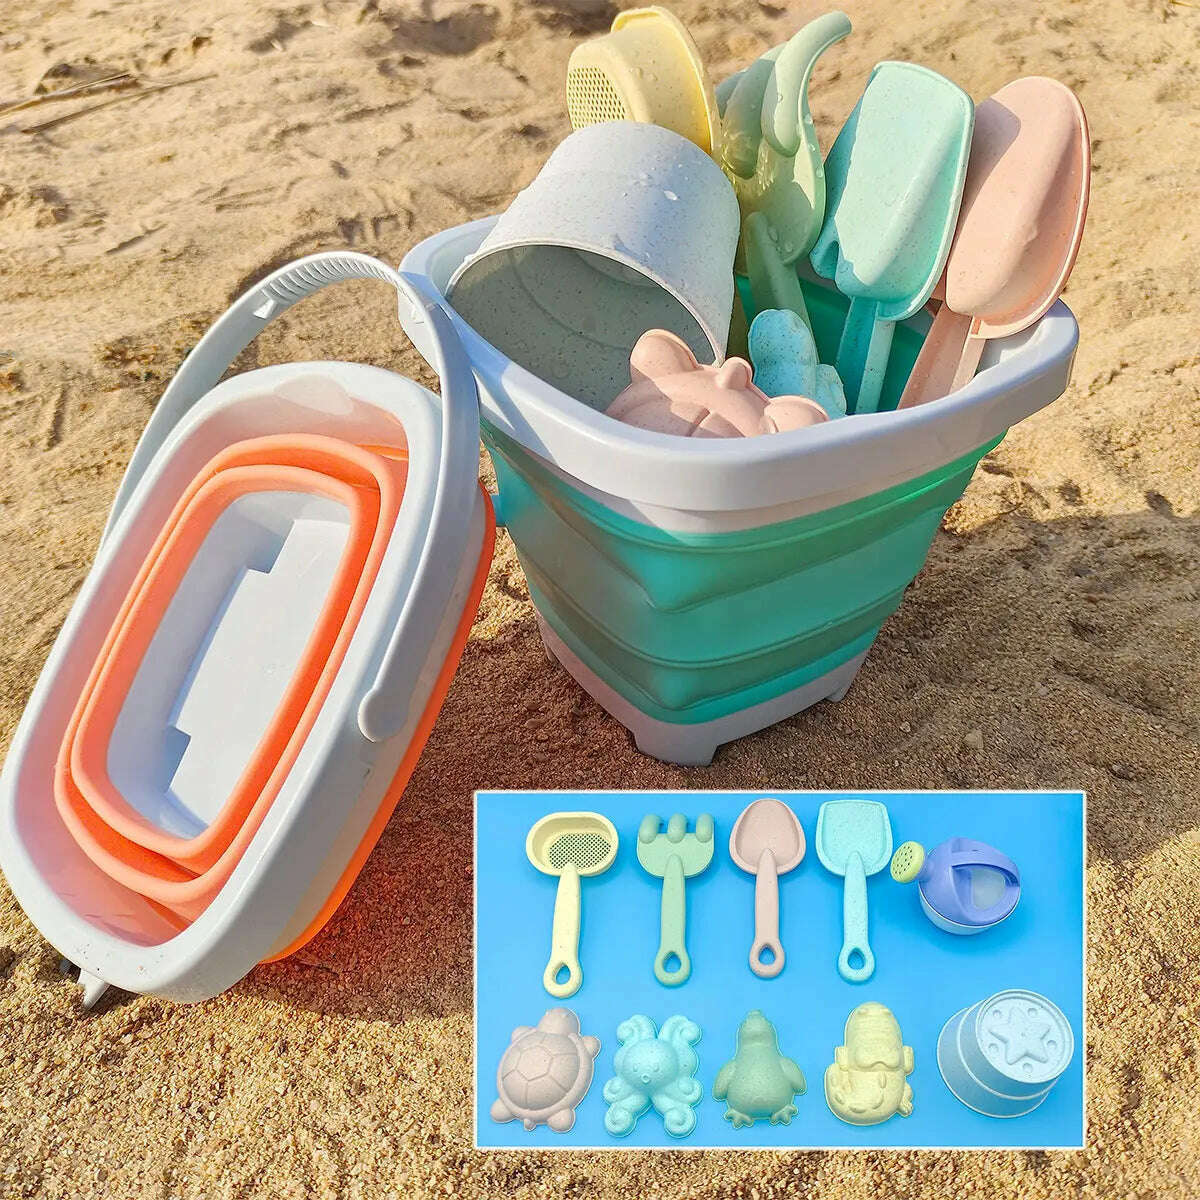 KIMLUD, Beach  Sand Play Water Set Folding Bucket Summer Toys for Children Kids Outdoor Game Youngster Sandbox Accessories Color Random, KIMLUD Womens Clothes